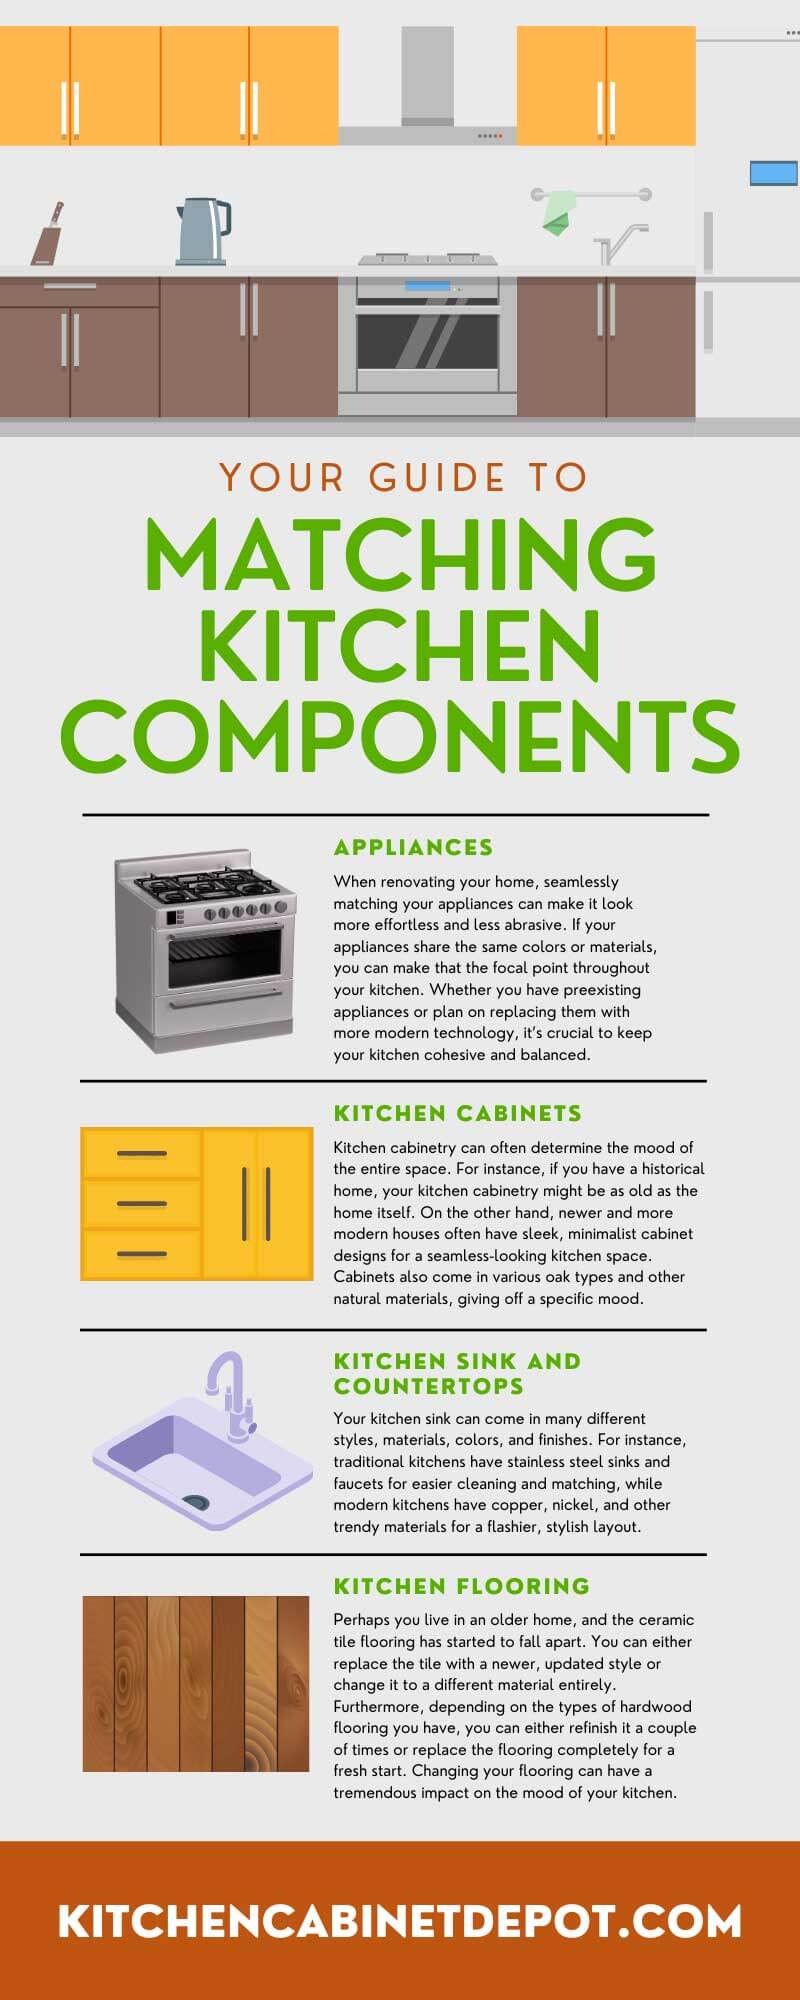 Your Guide to Matching Kitchen Components